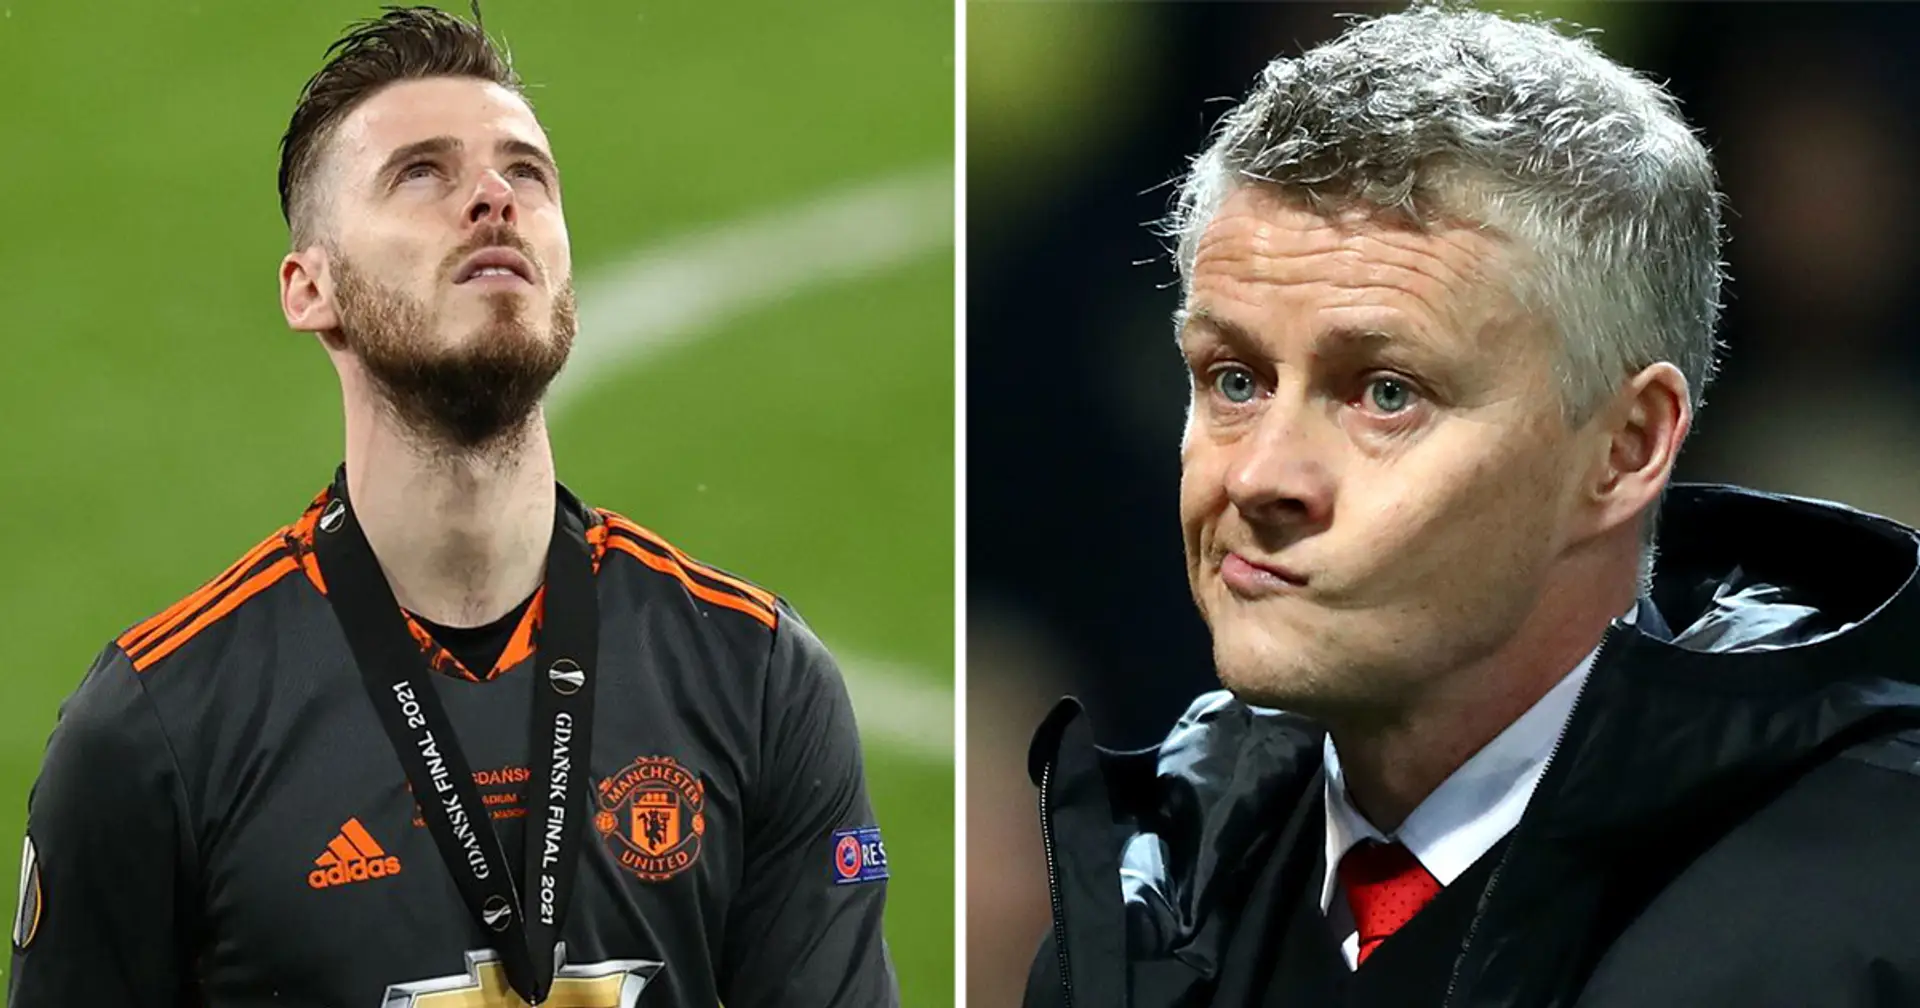 'Solskjaer's team is softer than a muffin and David is suffering': De Gea's former coach